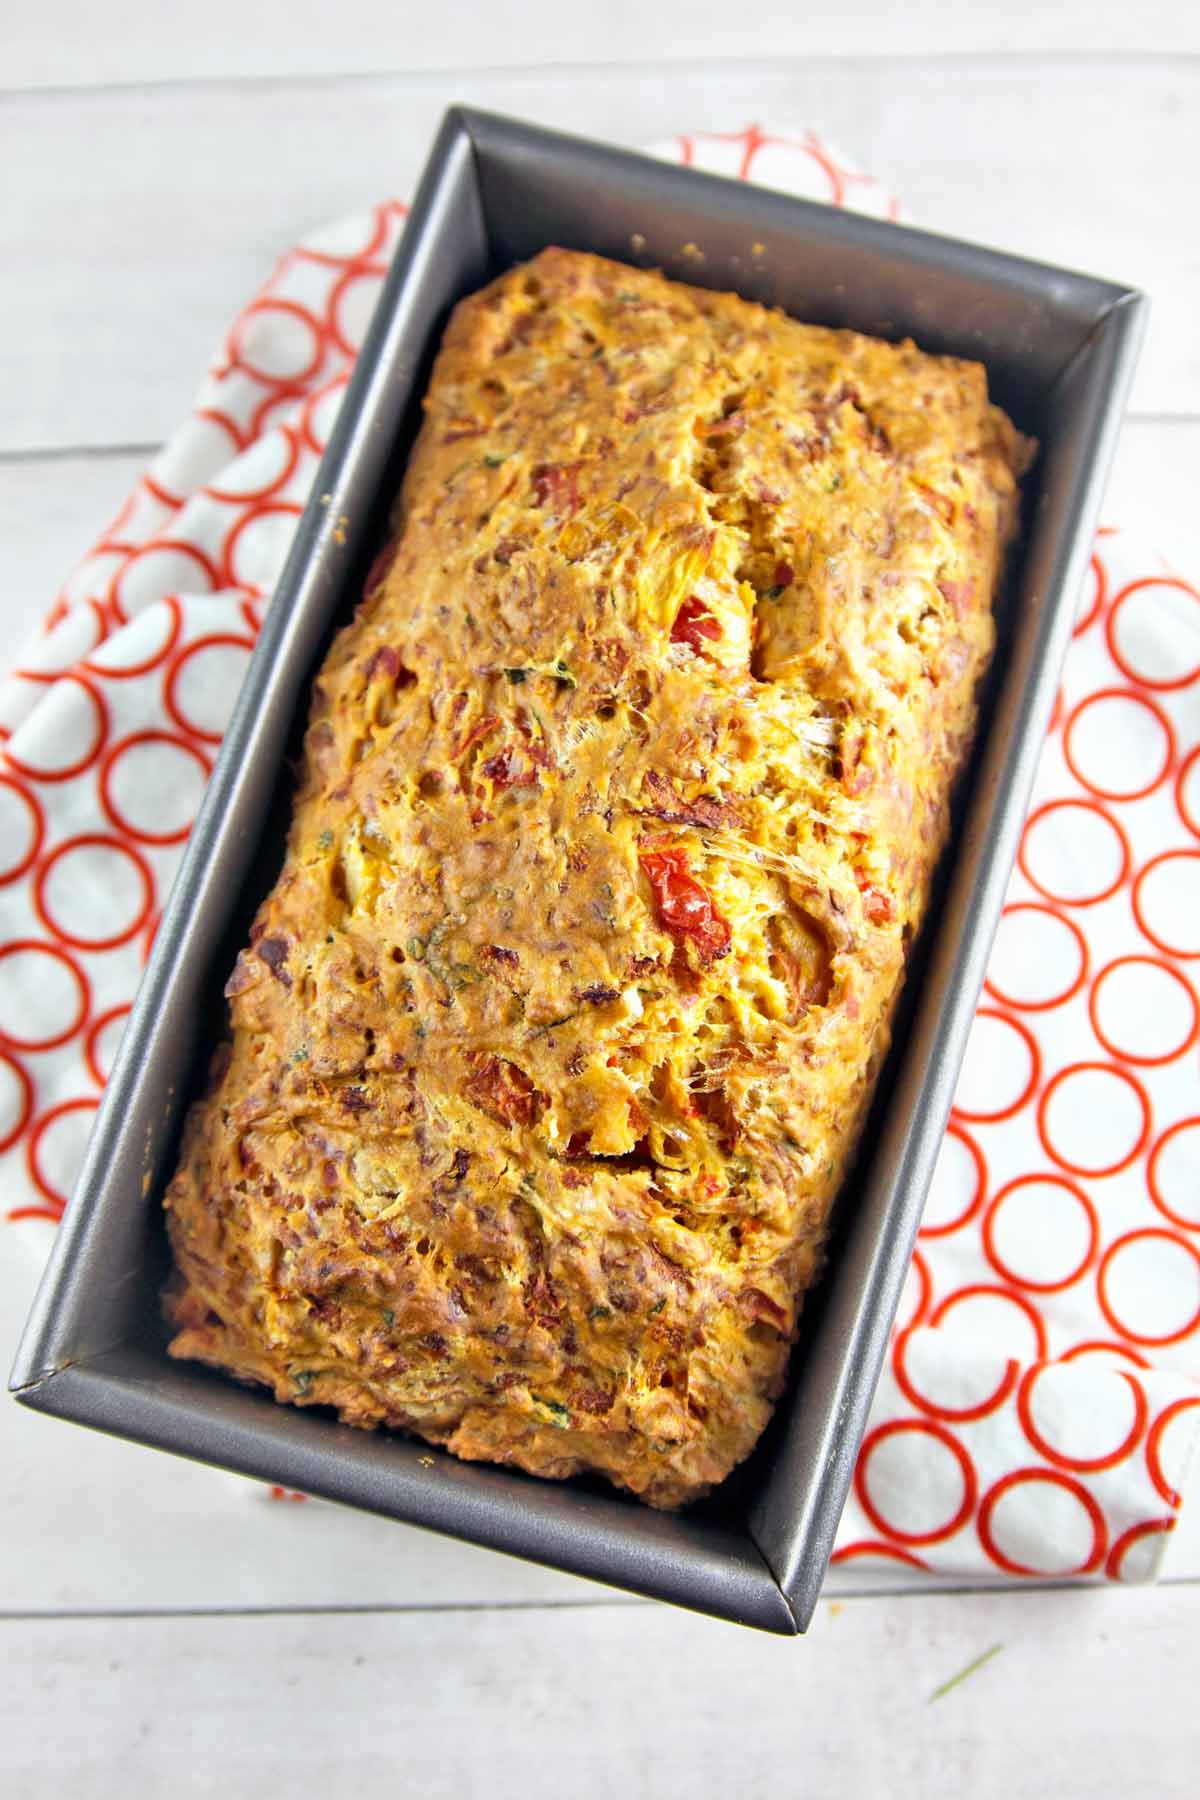 Italian Herb Tomato Bread: an easy savory quick bread starring fresh tomatoes, Italian herbs, garlic, and cheese. Bake up some summer right in your kitchen! {Bunsen Burner Bakery}